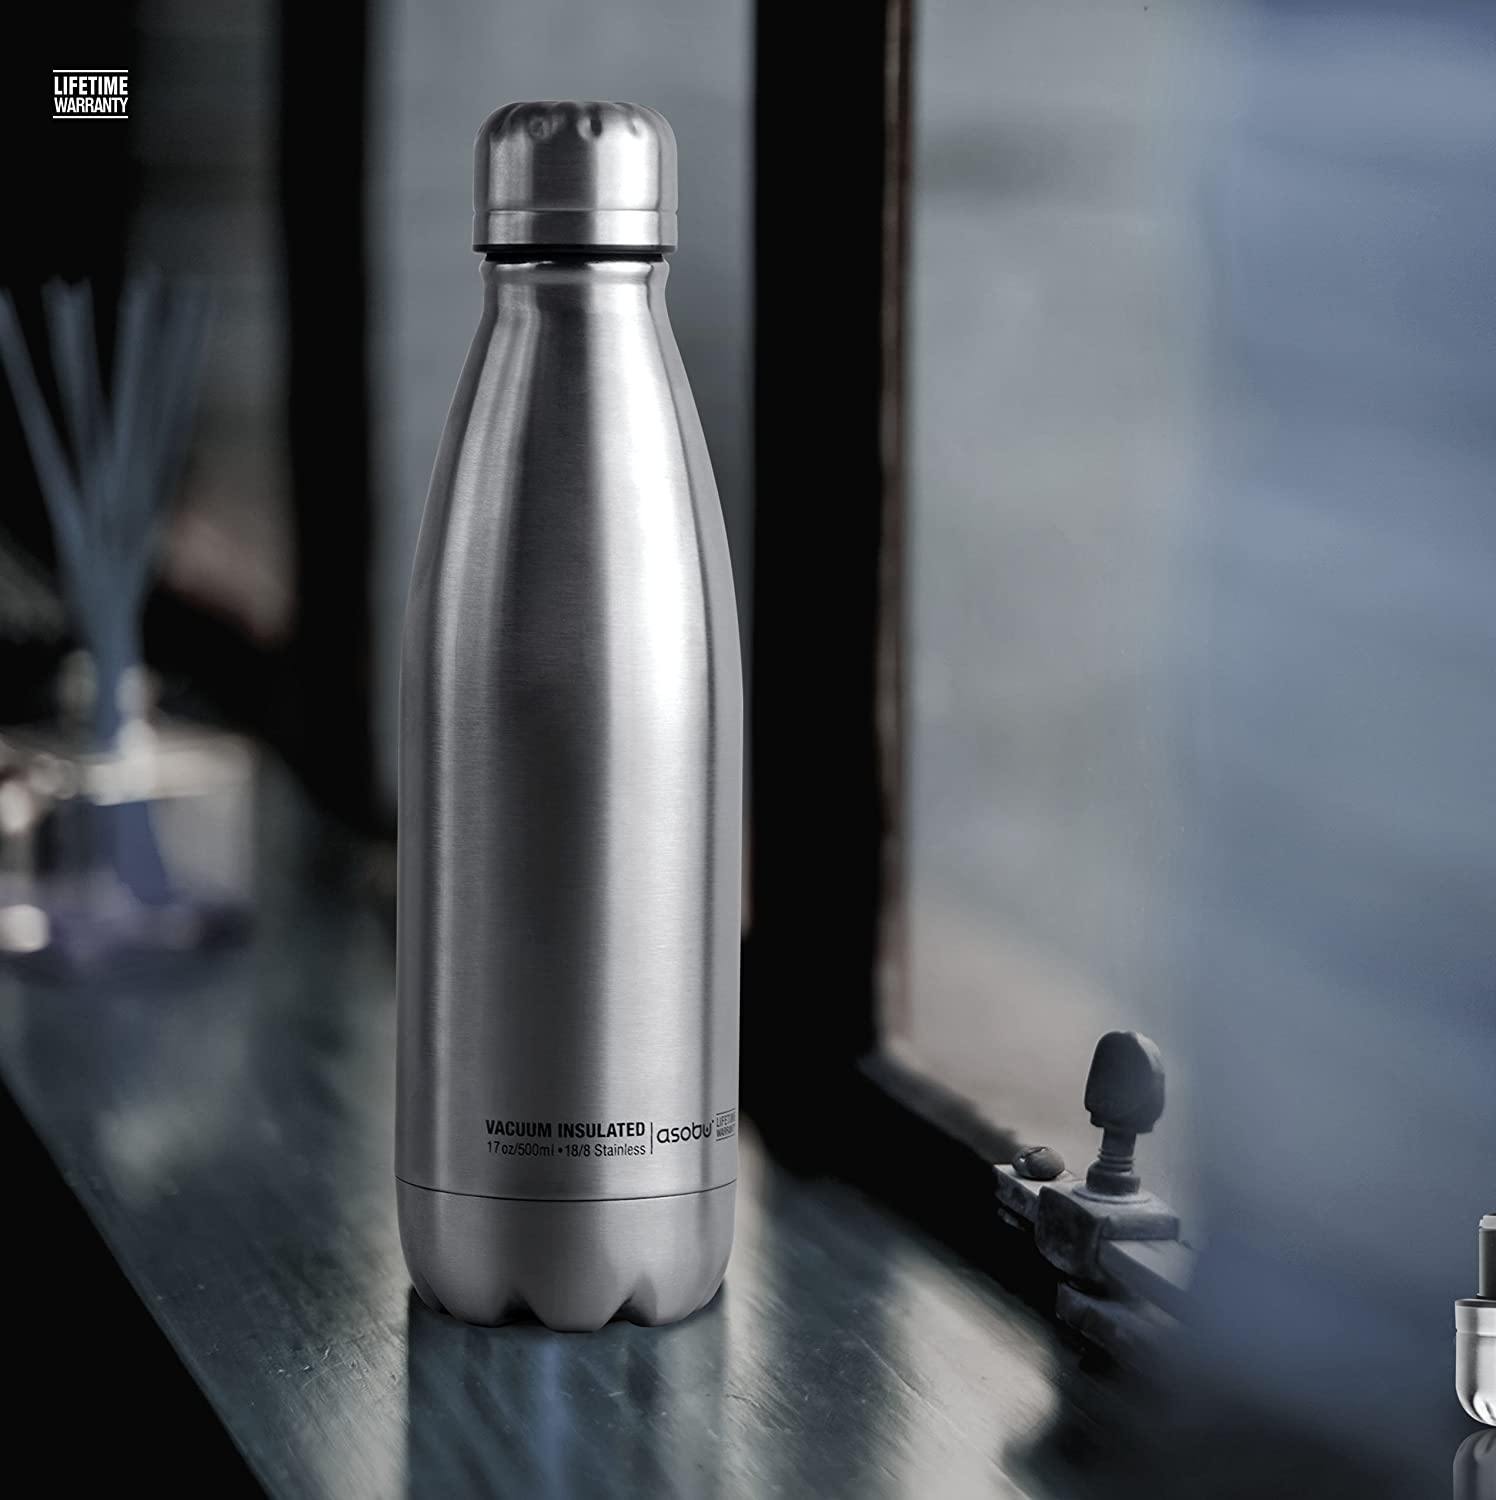 Asobu | Central Park Water Bottle - Stainless Steel Insulated With Twist Cap, Water Bottle, asobu, Defiance Outdoor Gear Co.